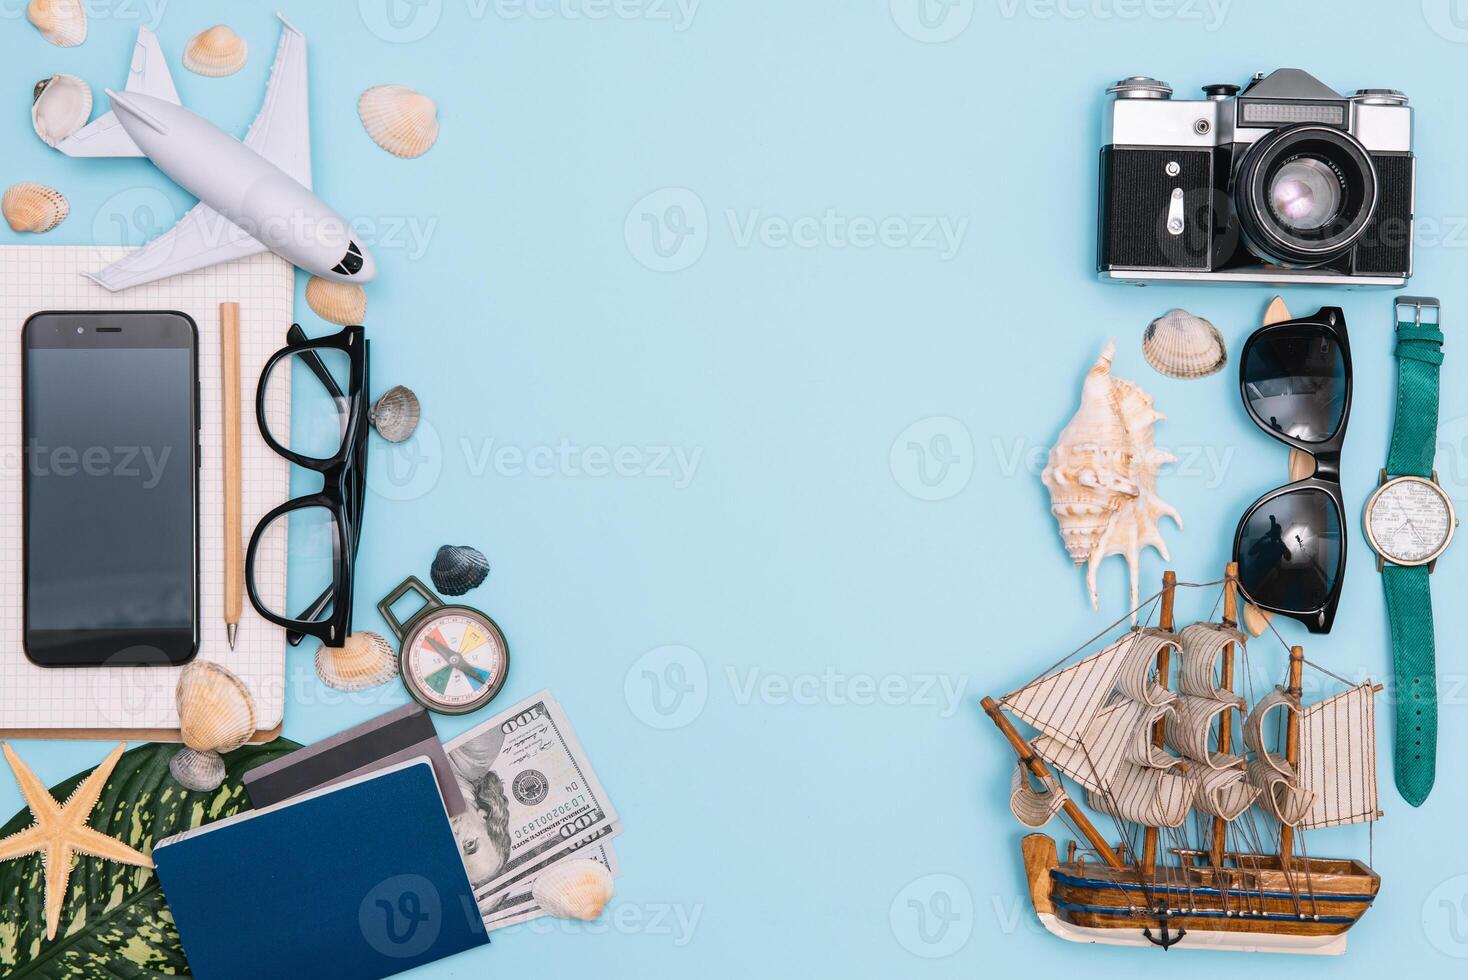 top view travel concept with retro camera films, smartphone, map, passport, compass and Outfit of traveler on blue background with copy space, Tourist essentials, vintage tone effect photo